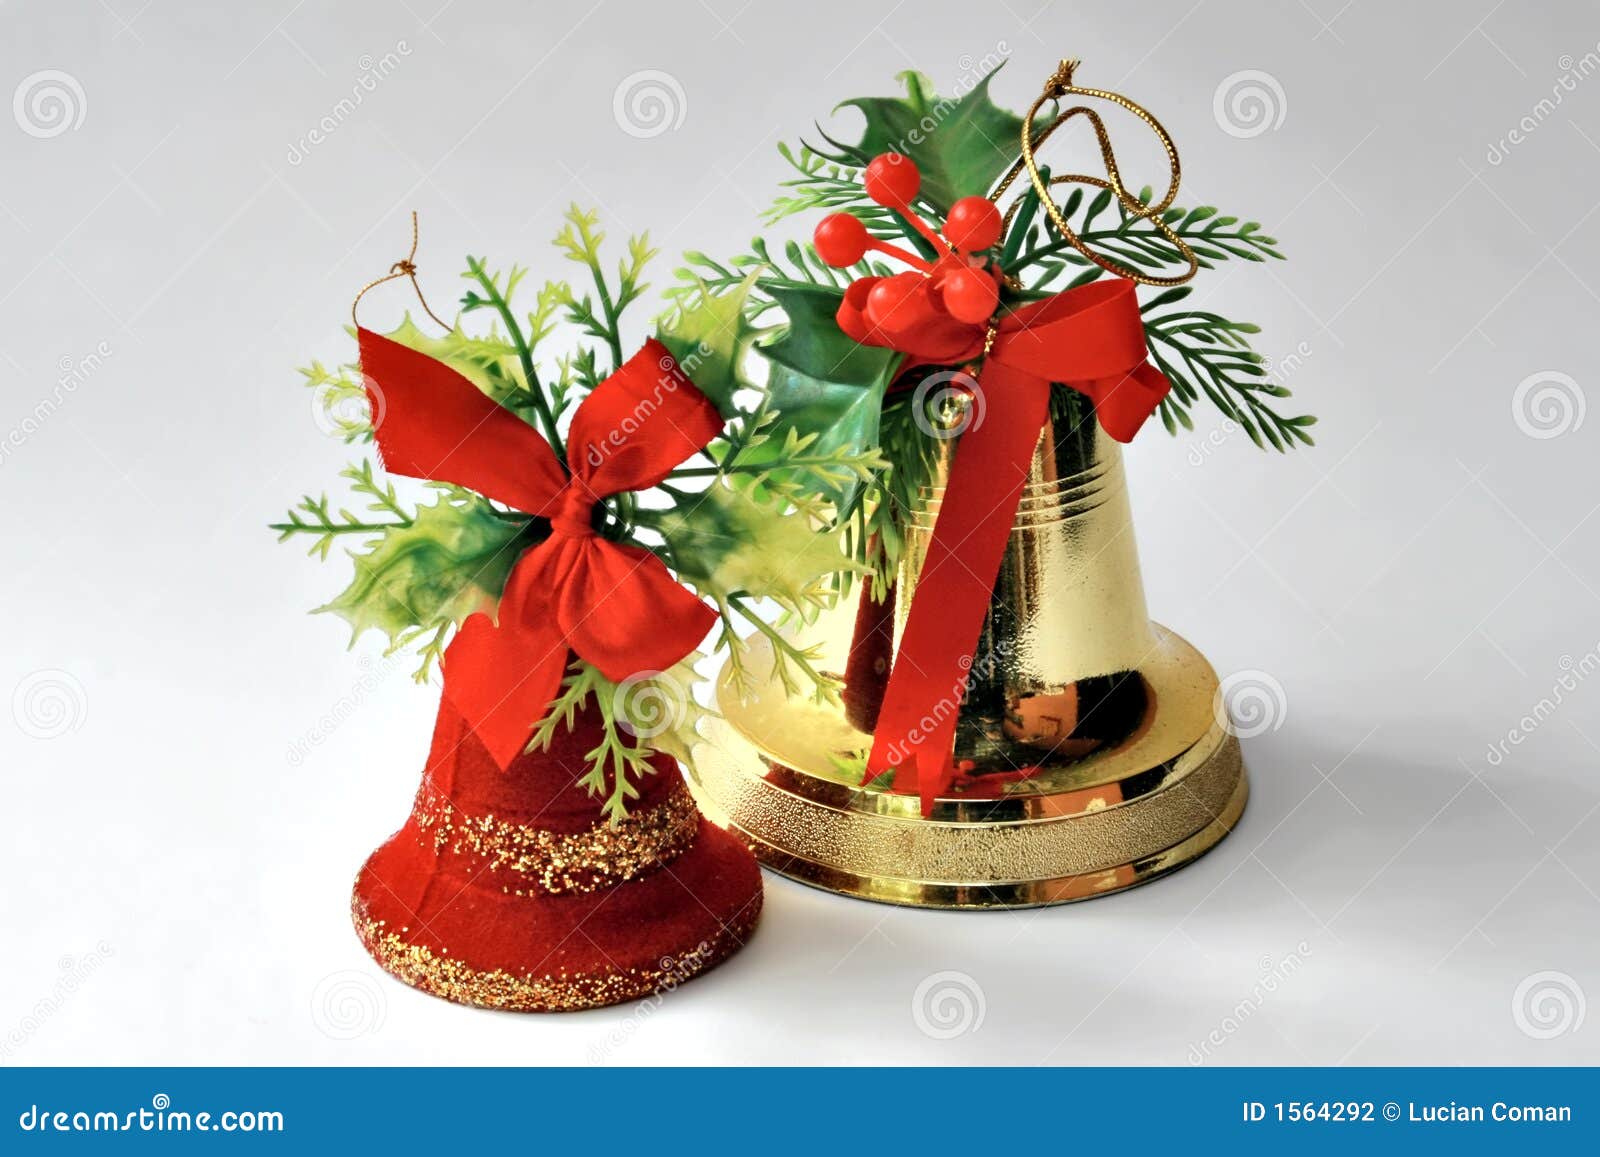 Two Christmas bell decorations with holly, mistletoe and ribbons ...